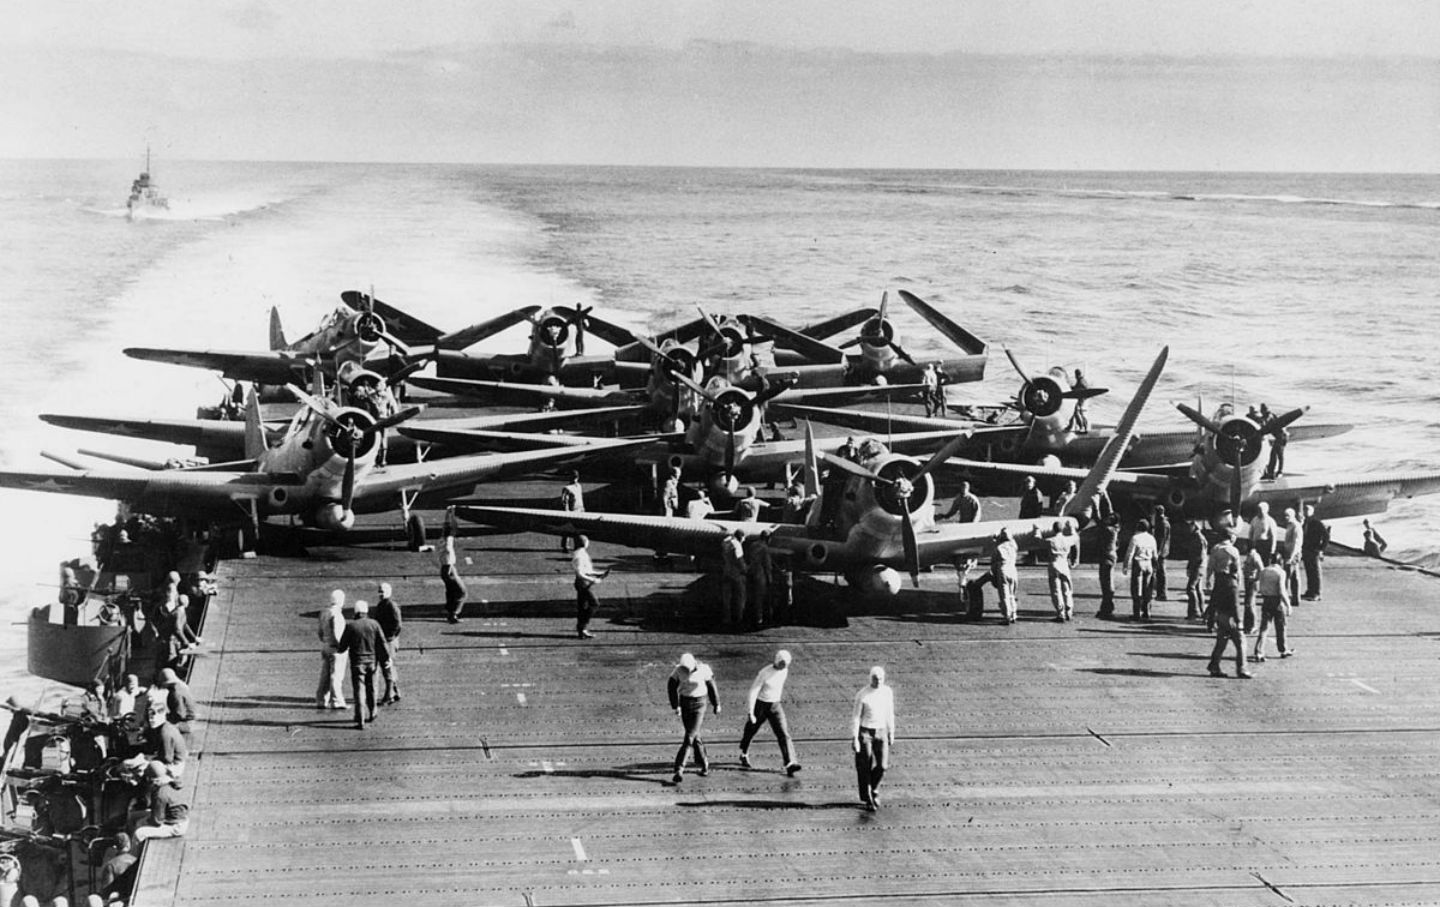 June 7, 1942: Battle of Midway Ends in Allied Victory | The Nation